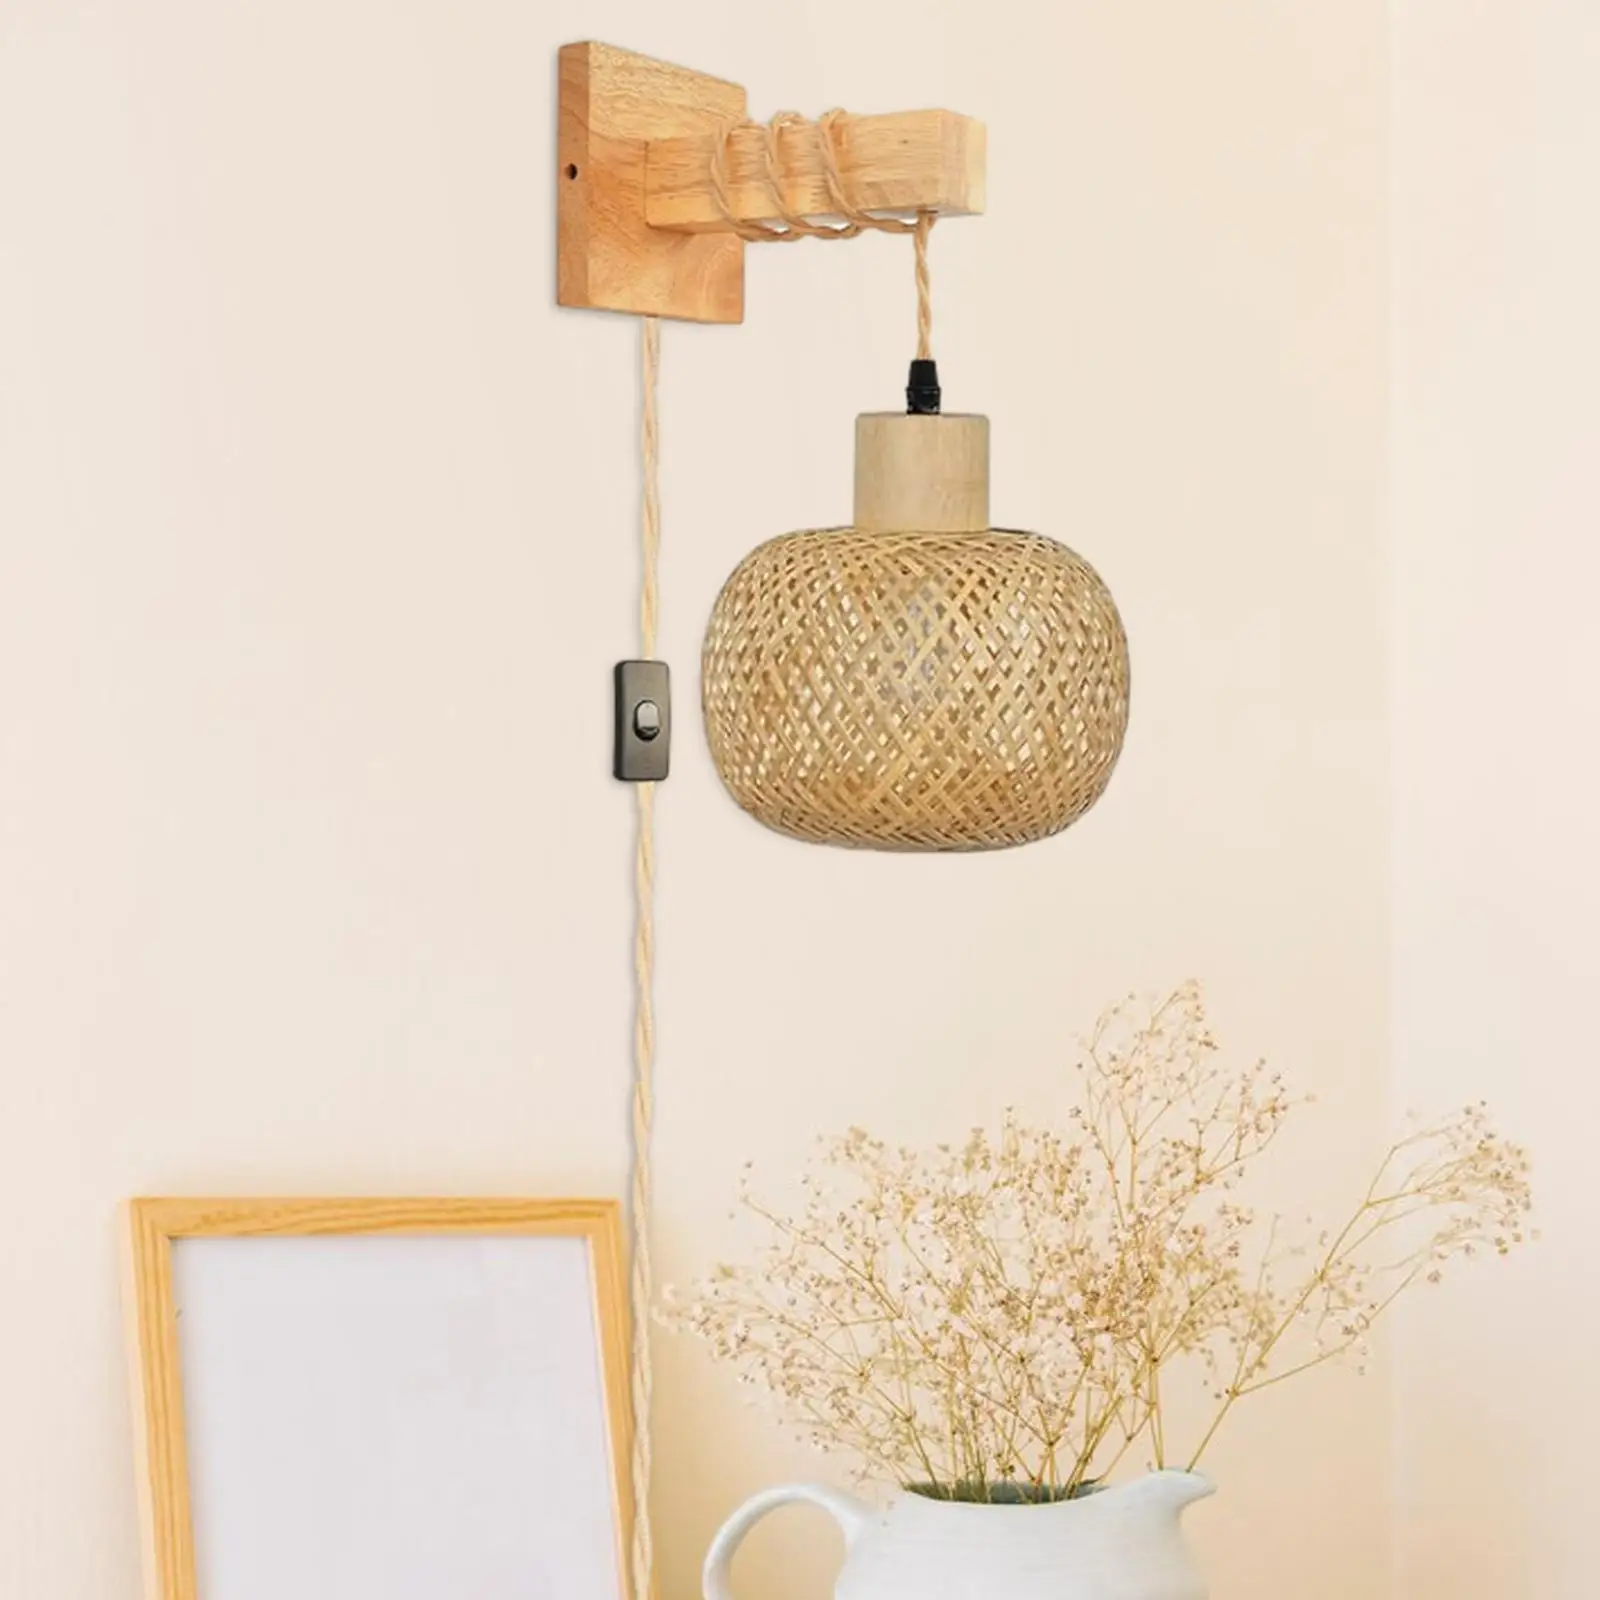 Bamboo Wall Sconce Hand Woven Rustic Plug in Pendant Light Farmhouse Hanging Lamp for Reading Bedroom Home Bathroom Kitchen